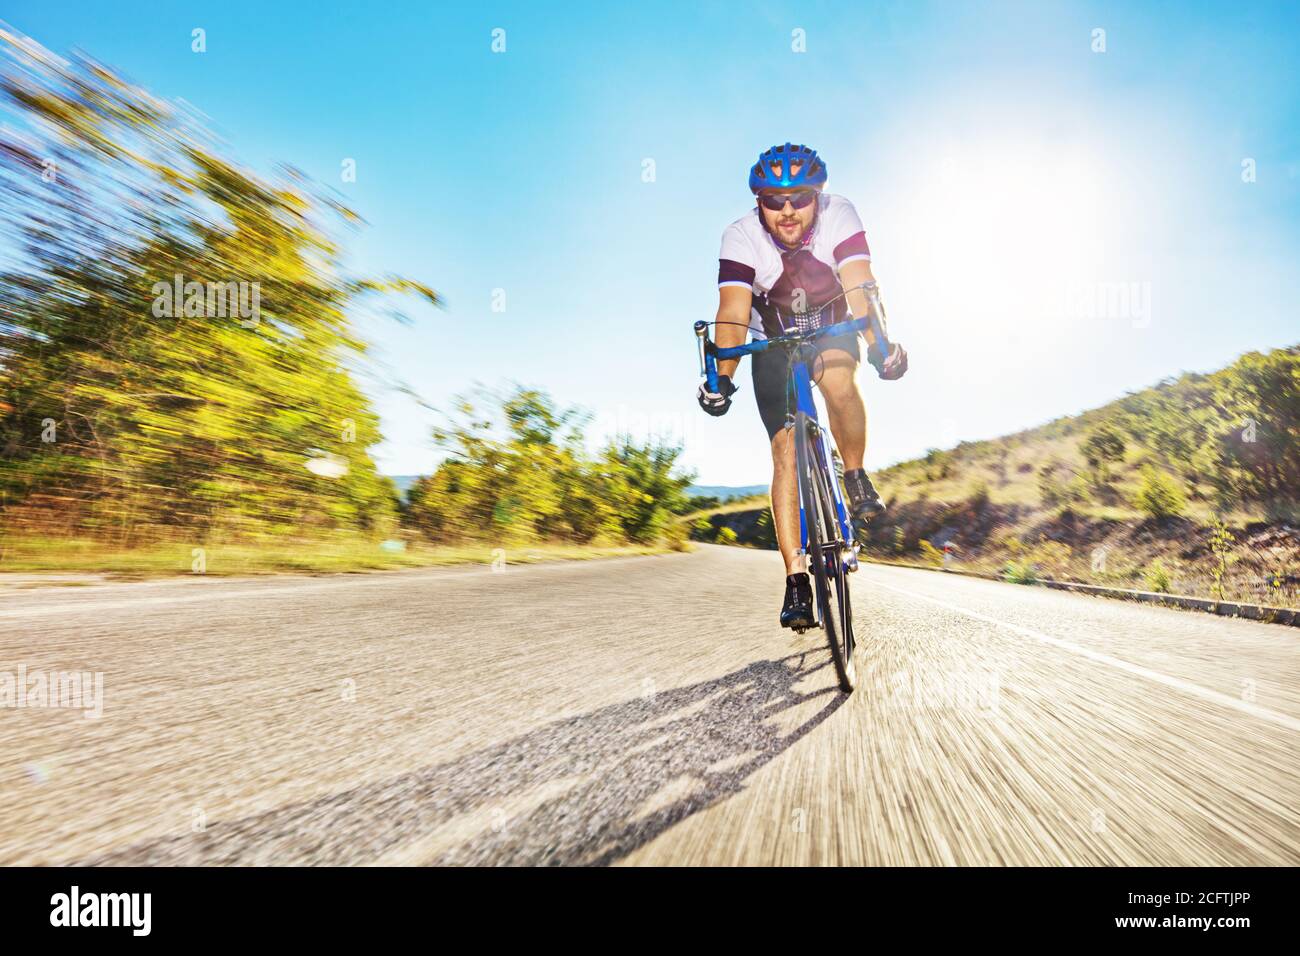 Male bicyclist riding on an open road Stock Photo